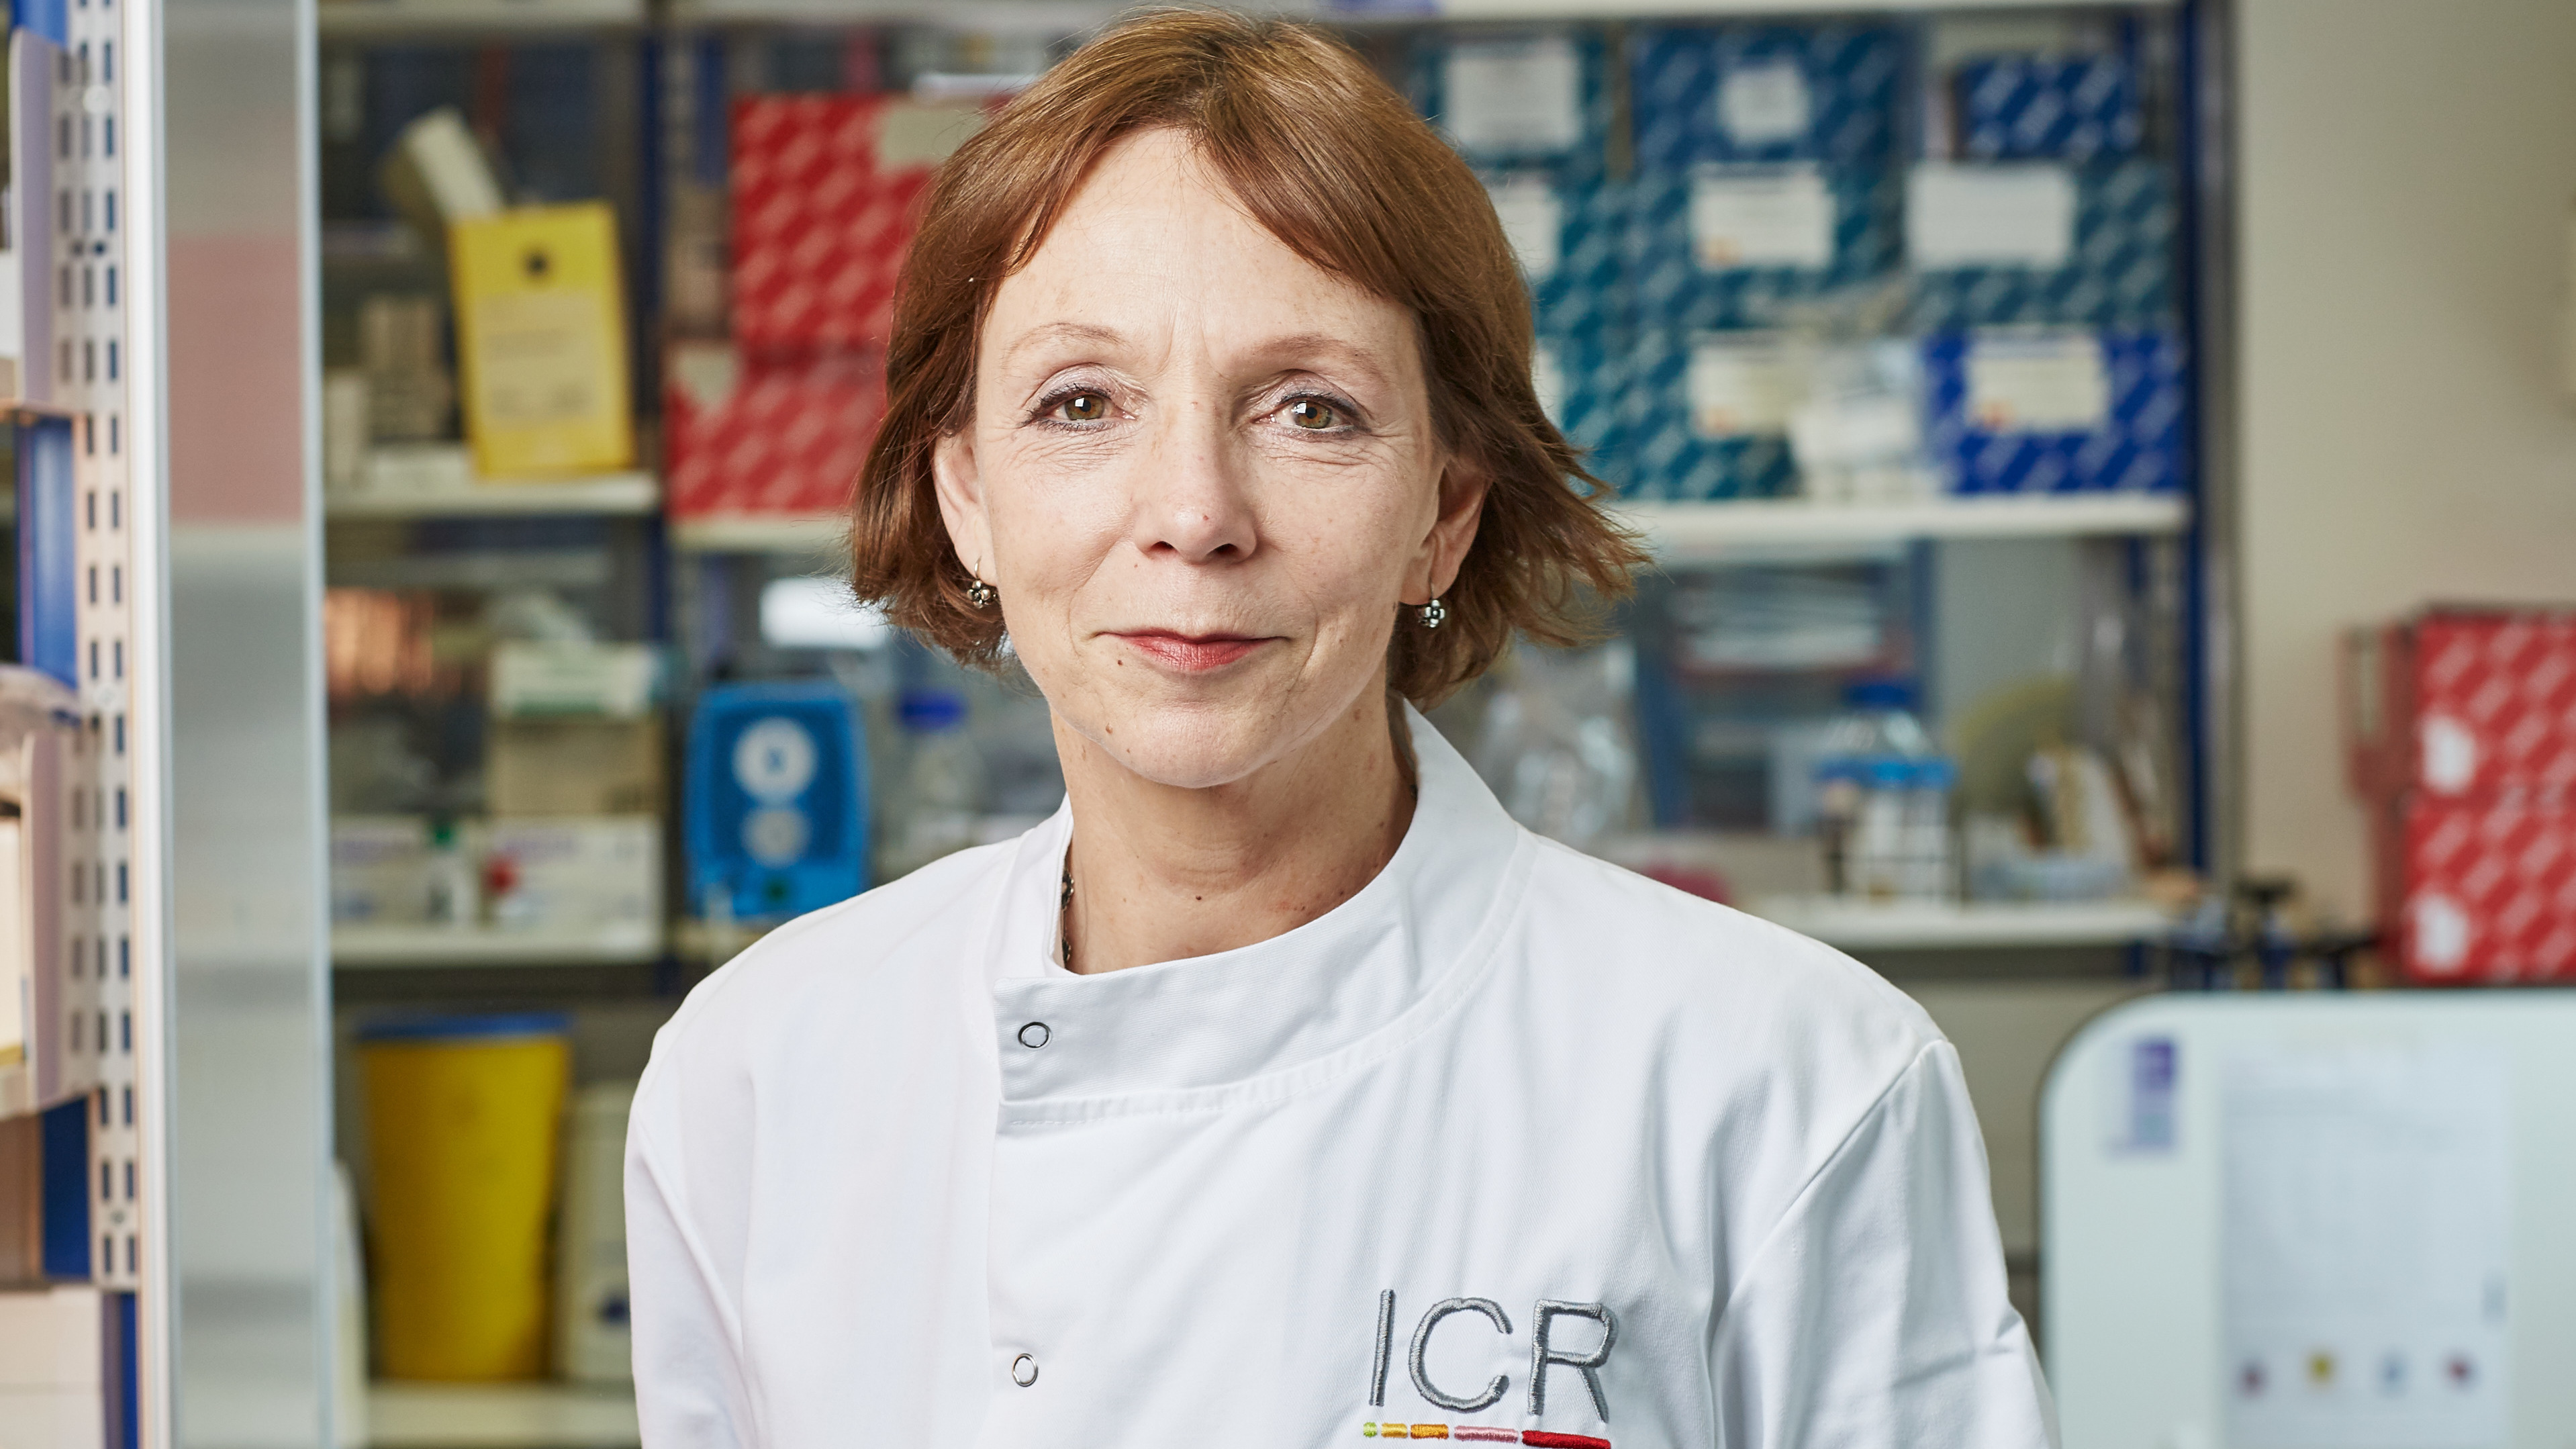 Professor Clare Isacke in the ICR lab